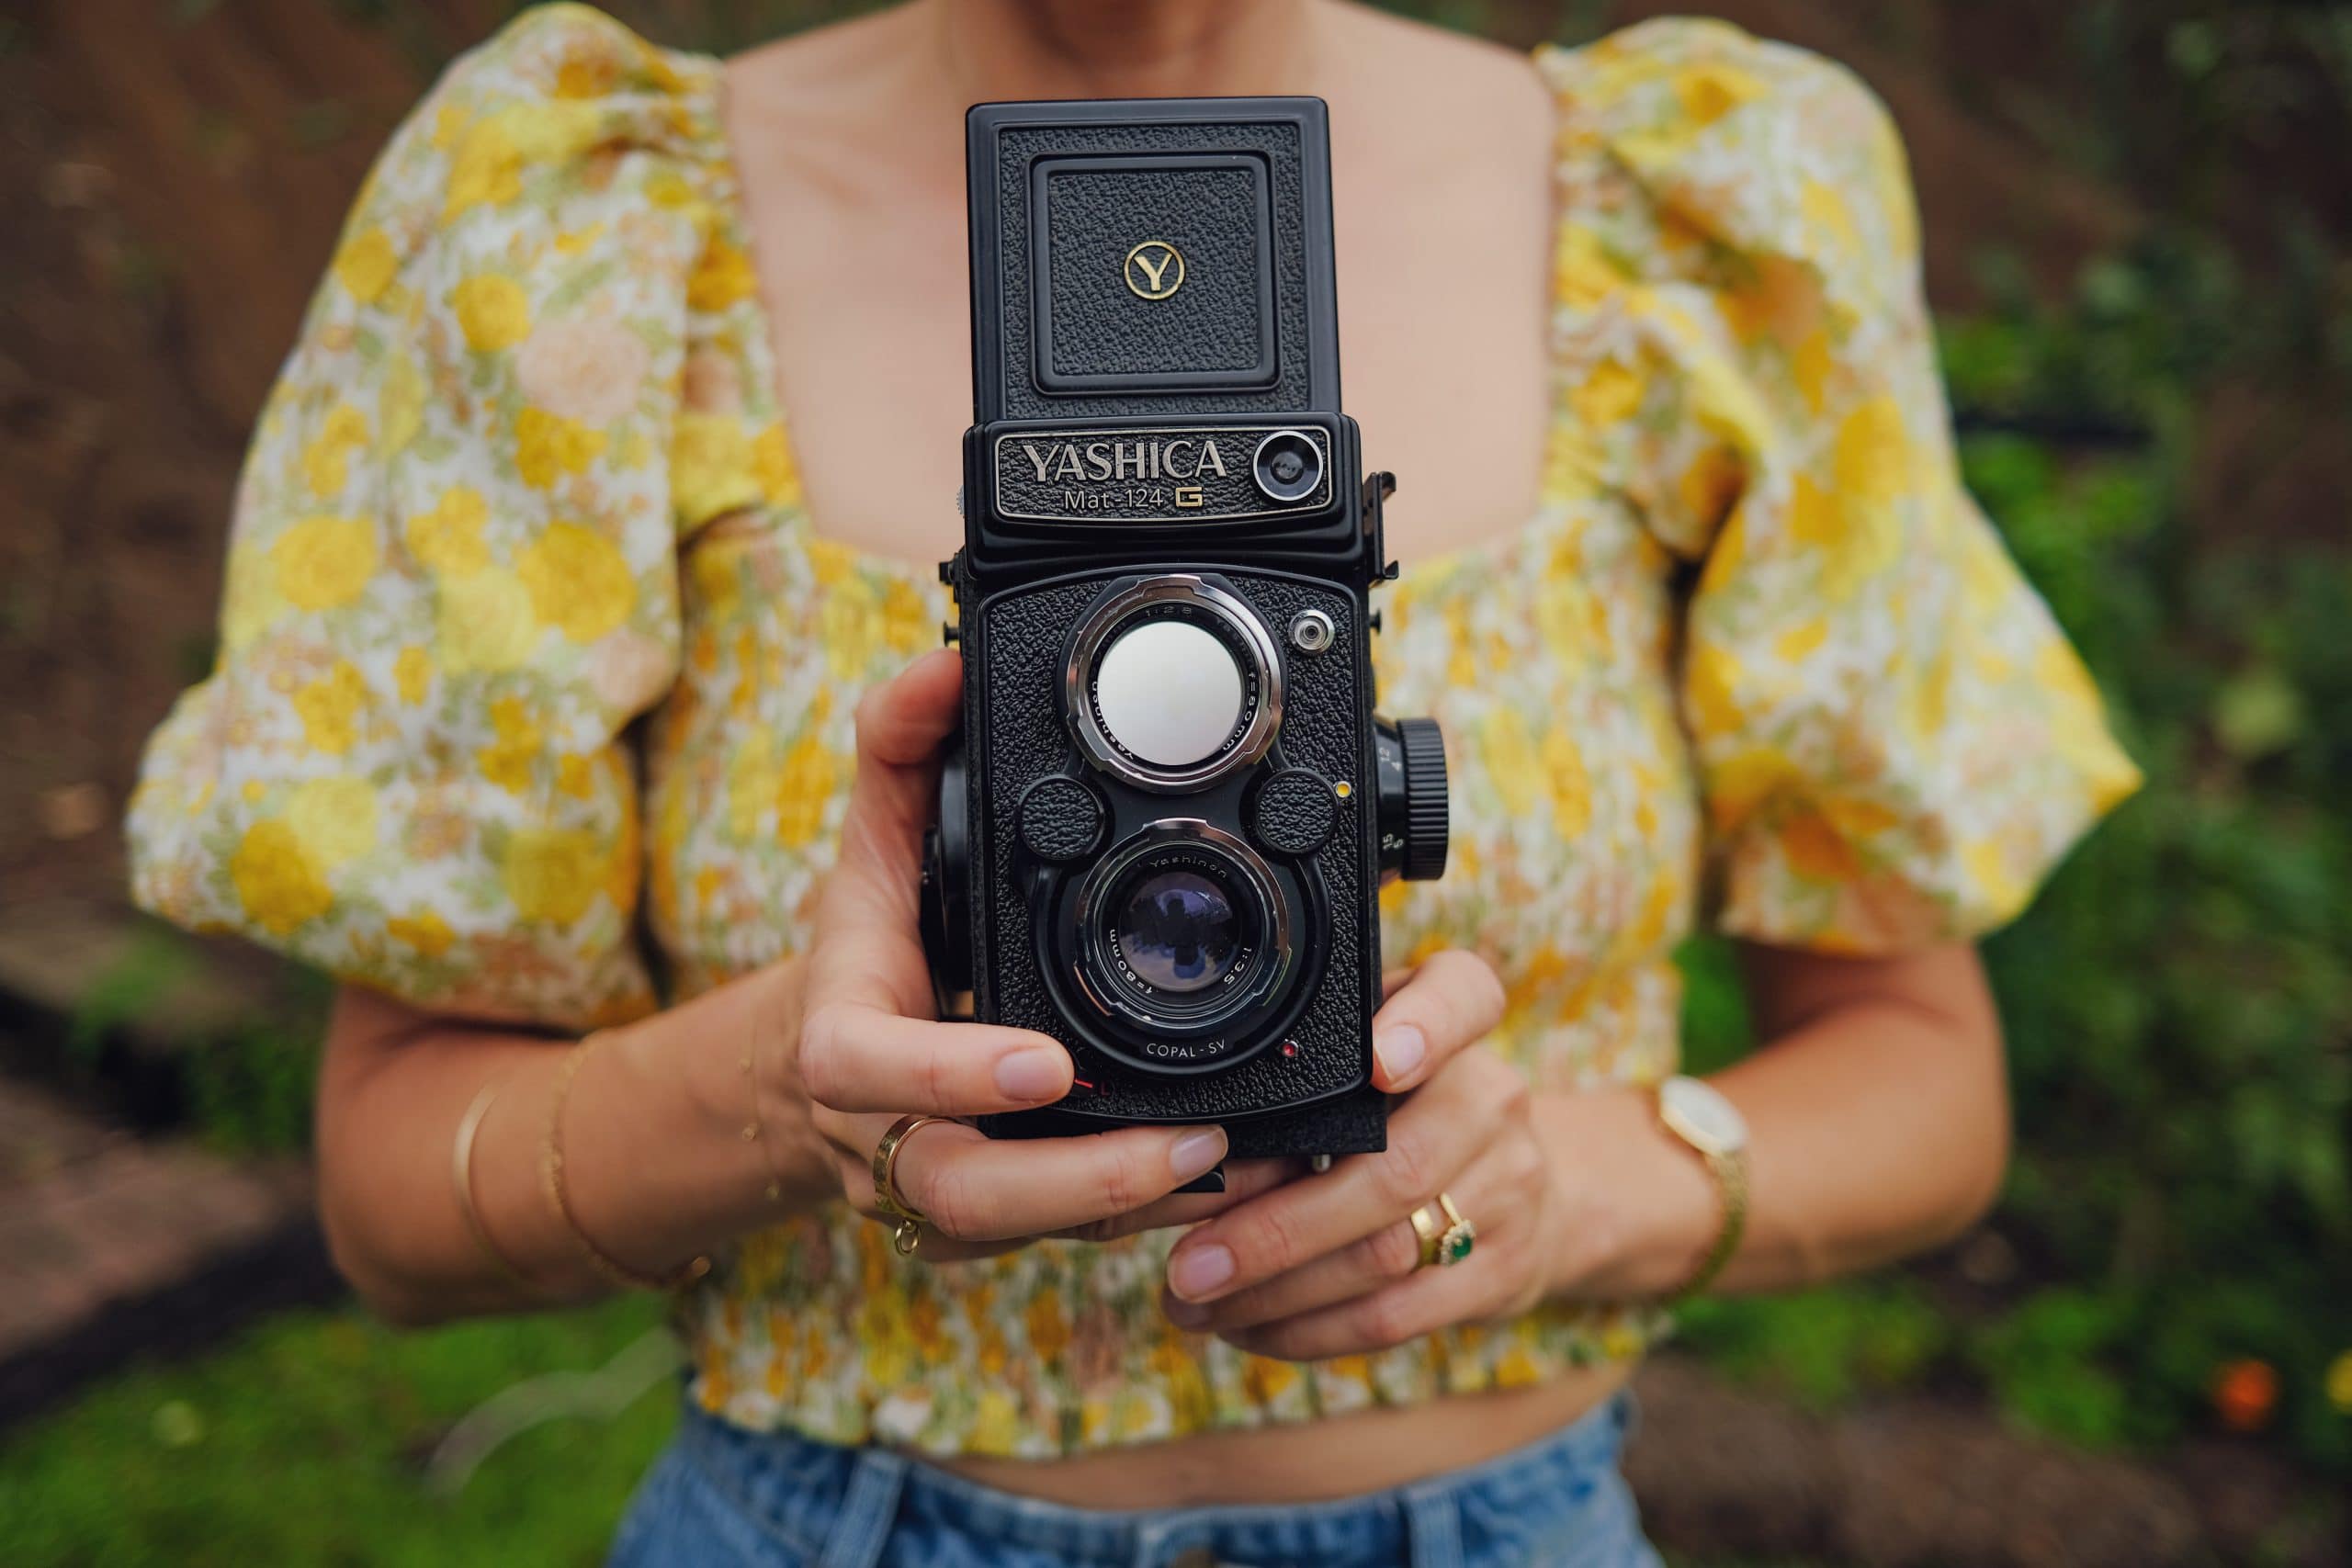 Film Camera Roundup: What's Available These Days?